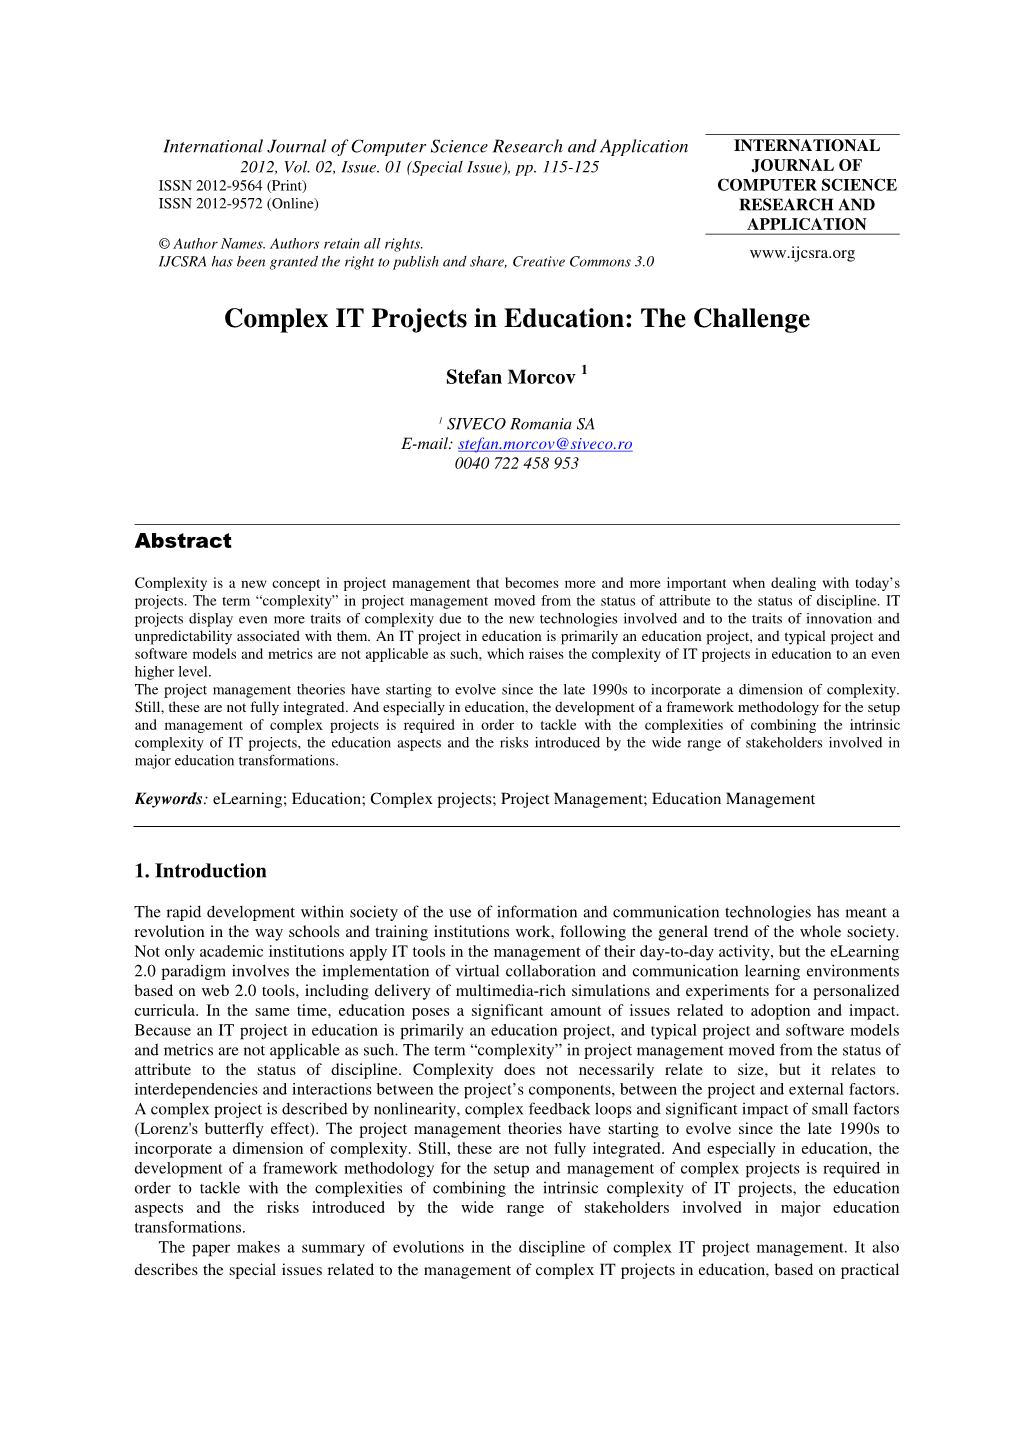 Complex IT Projects in Education: the Challenge